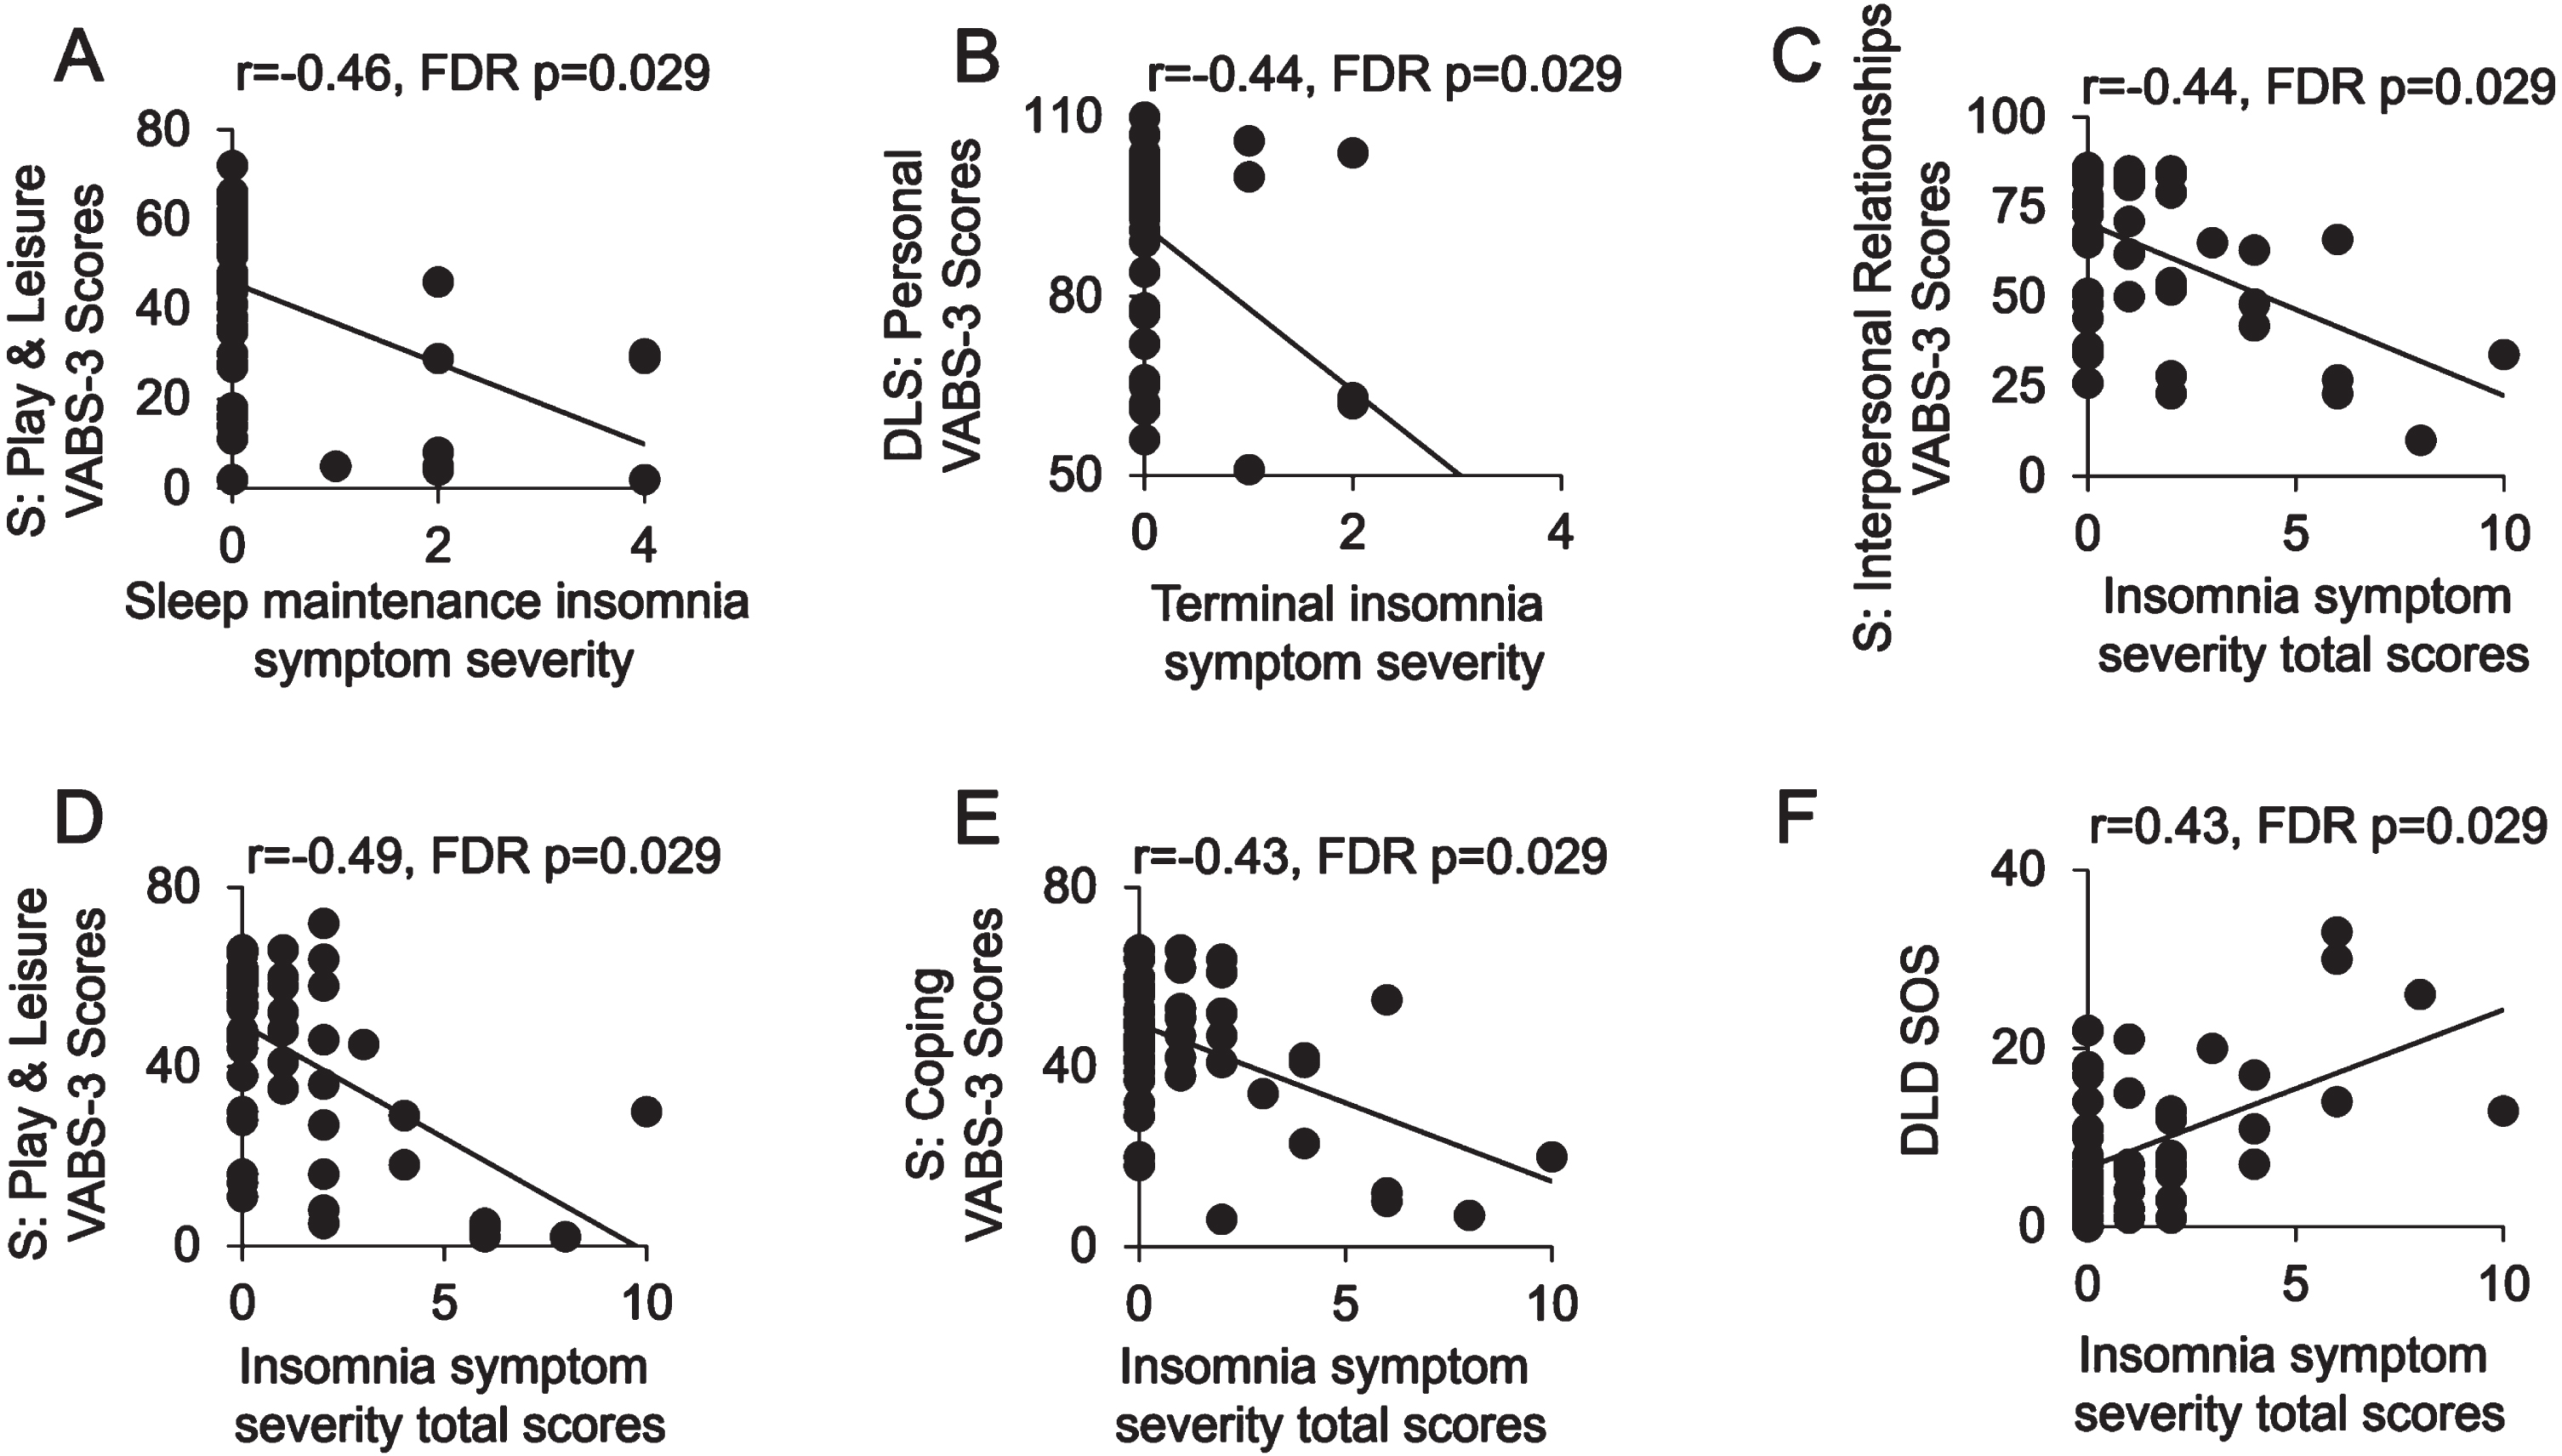 Insomnia symptom severity by adaptive behavioral function and socialization impairments in adults with Down Syndrome. Scatter plots are shown of associations between sleep maintenance (A), terminal insomnia symptom severity (B) and insomnia symptom severity total scores (C–E) and subdomains of the Vineland Adaptive Behavior Scales. 3rd Edition (VABS-3): Play and Leisure (A, D), Personal (B), Interpersonal Relationships (C), and Coping skills (E). An additional scatter plot (F) is shown of insomnia symptom severity total scores predicting Dementia Questionnaire for People with Learning Disabilities (DLD) Sum of Social scores (SOS). FDR, false discovery rate multiple comparisons correction method; DLS, Daily Living Skills; S, Socialization.